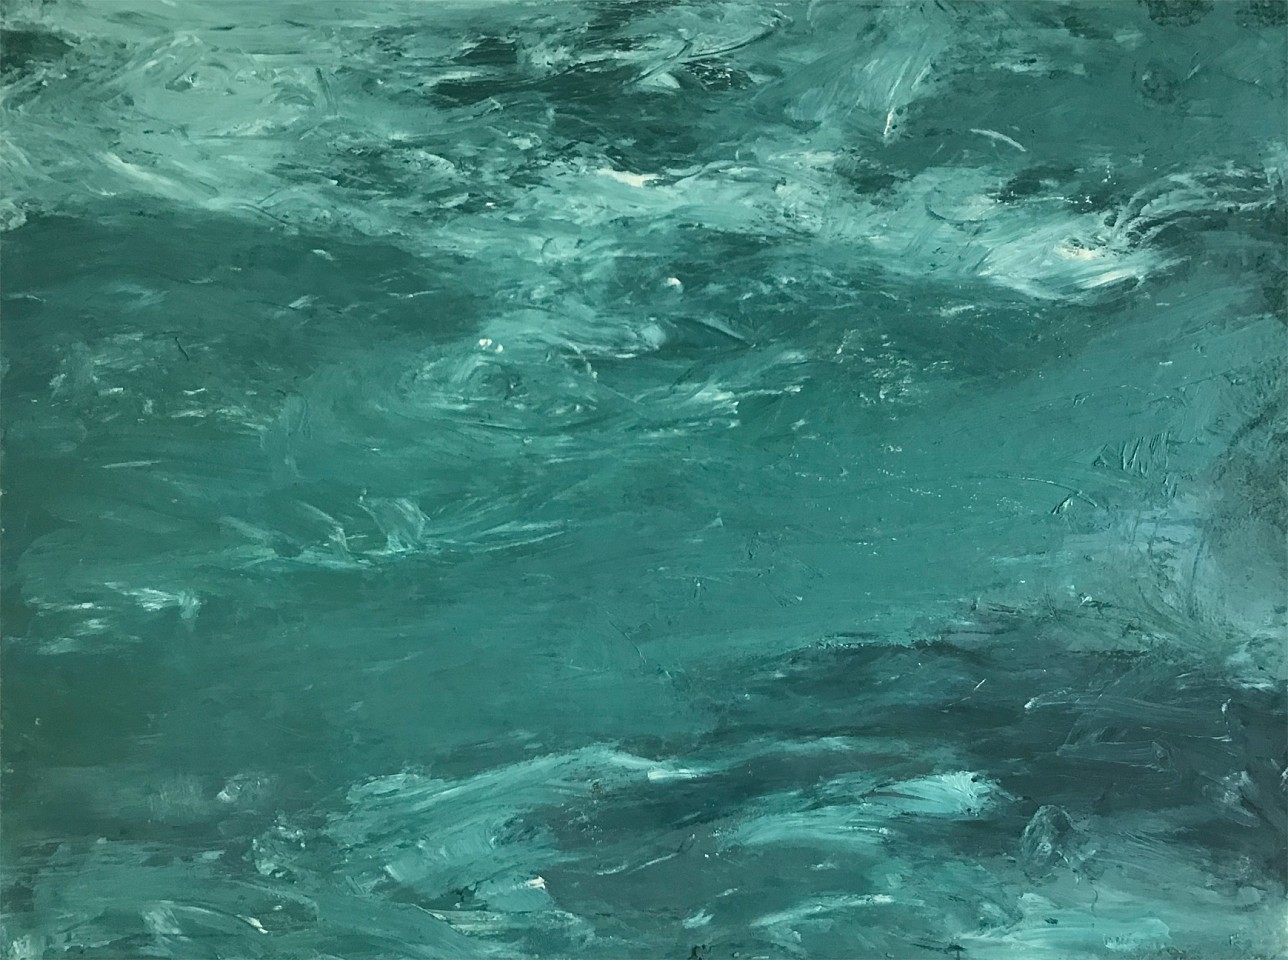 Peter Schroth
Cold Sea 4, 2018
SCHR754
oil on paper, 9 x 12 inches